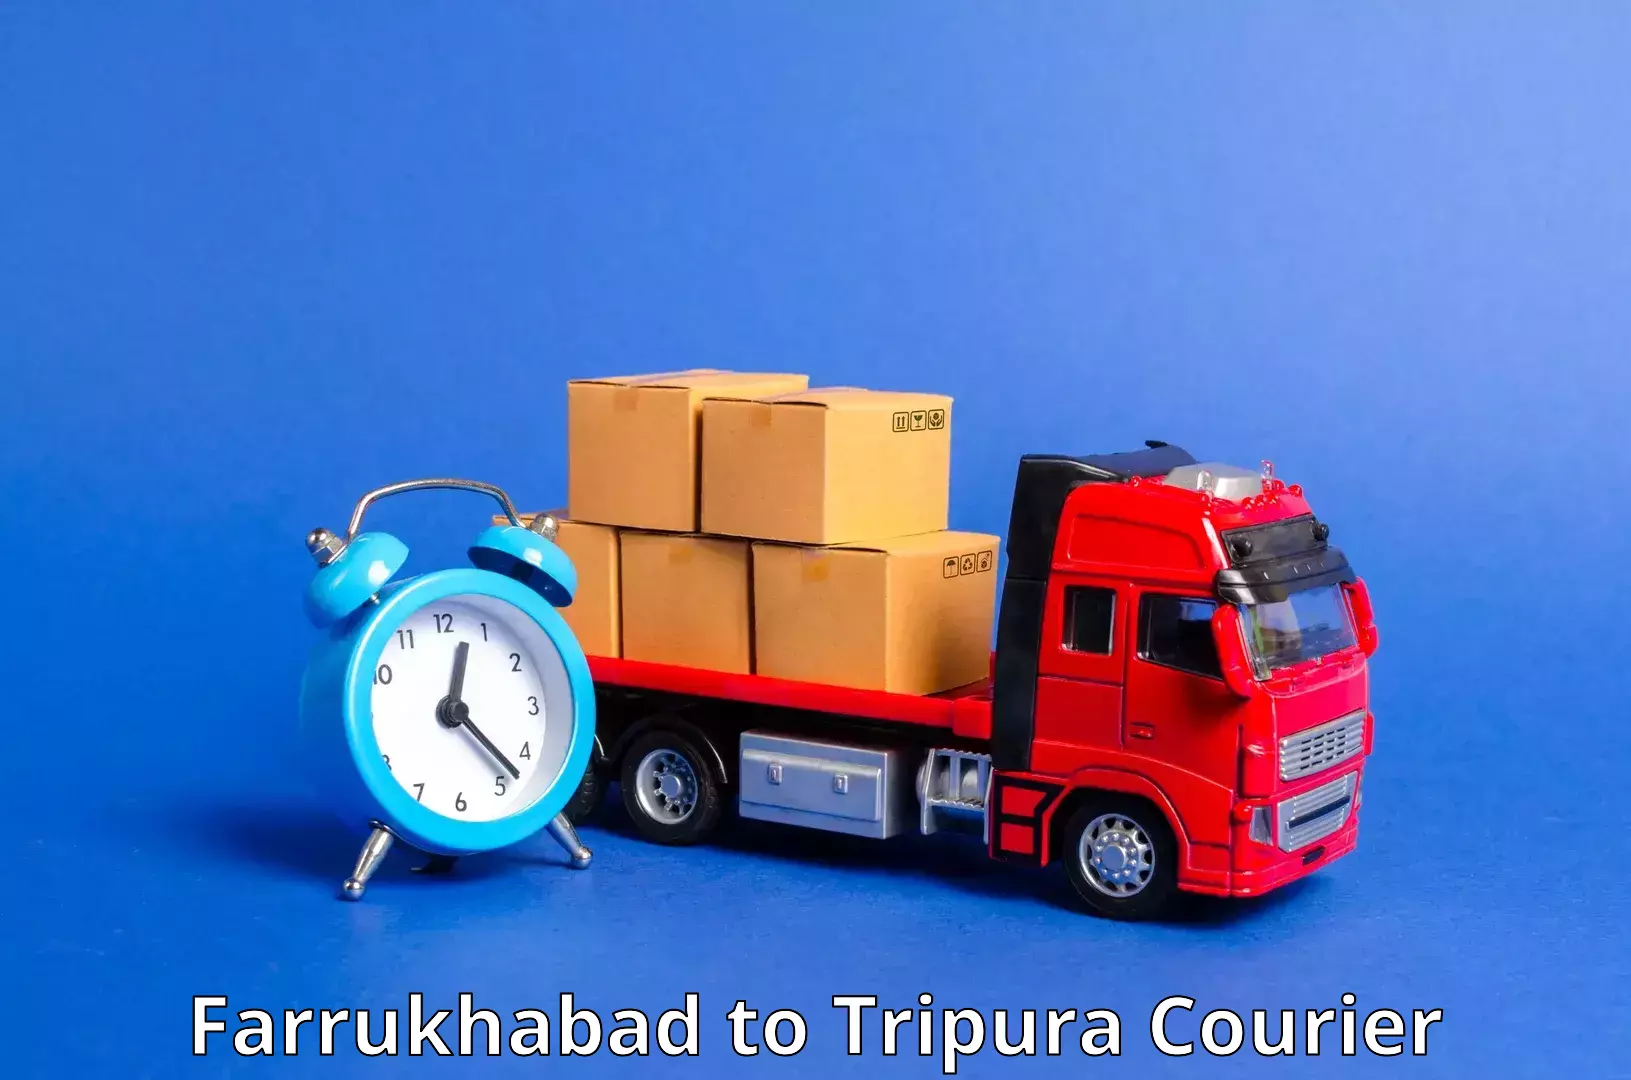 Round-the-clock parcel delivery Farrukhabad to Udaipur Tripura